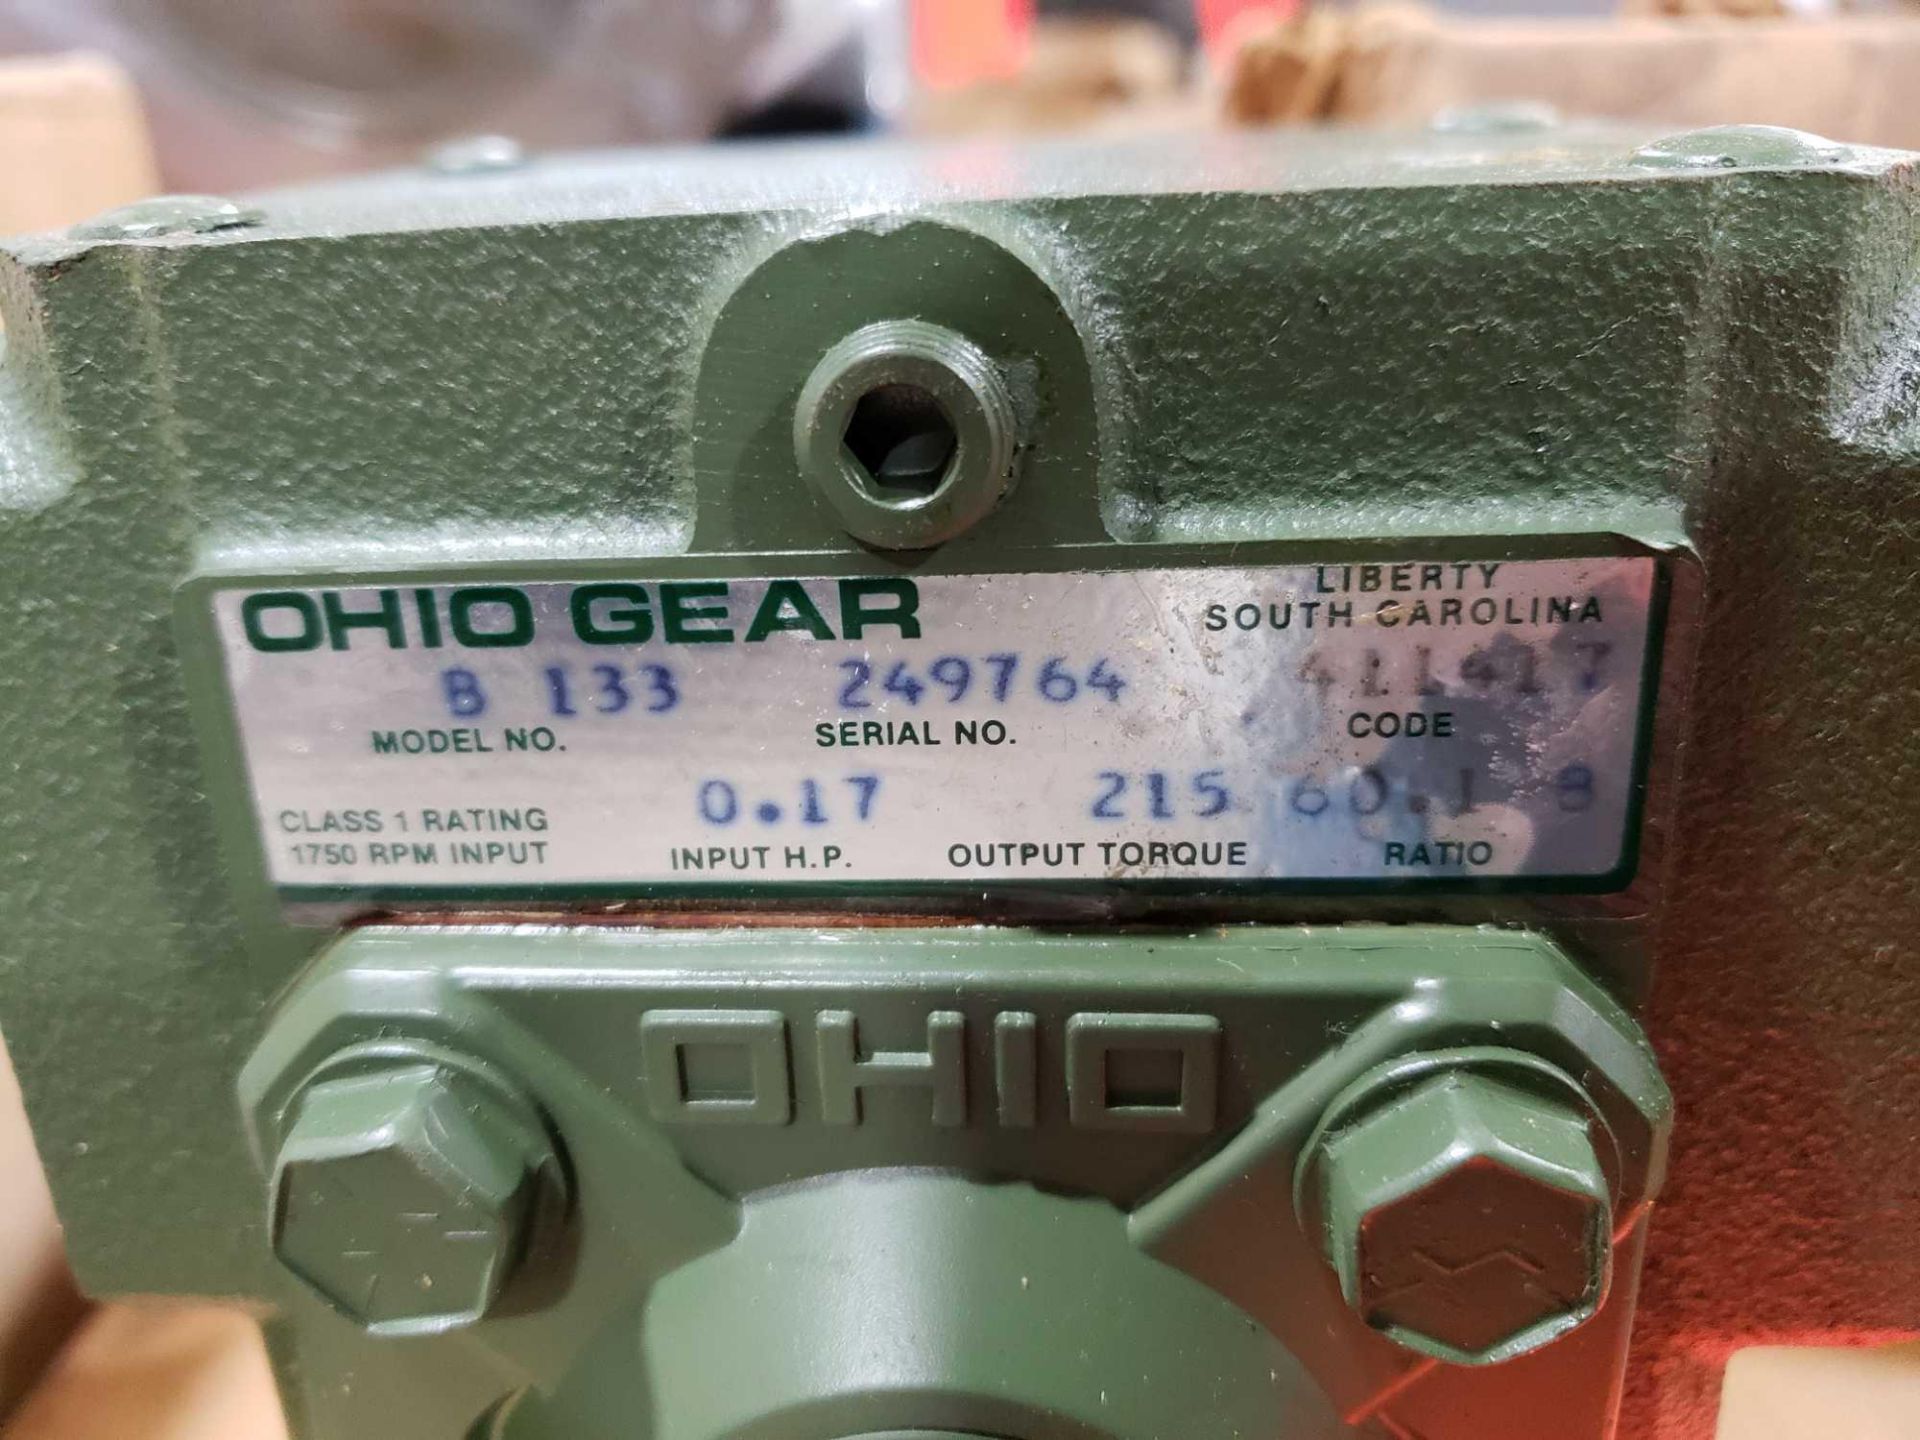 Ohio Gear model B-133 gearbox. 60.1 B ratio. New in box. - Image 2 of 2